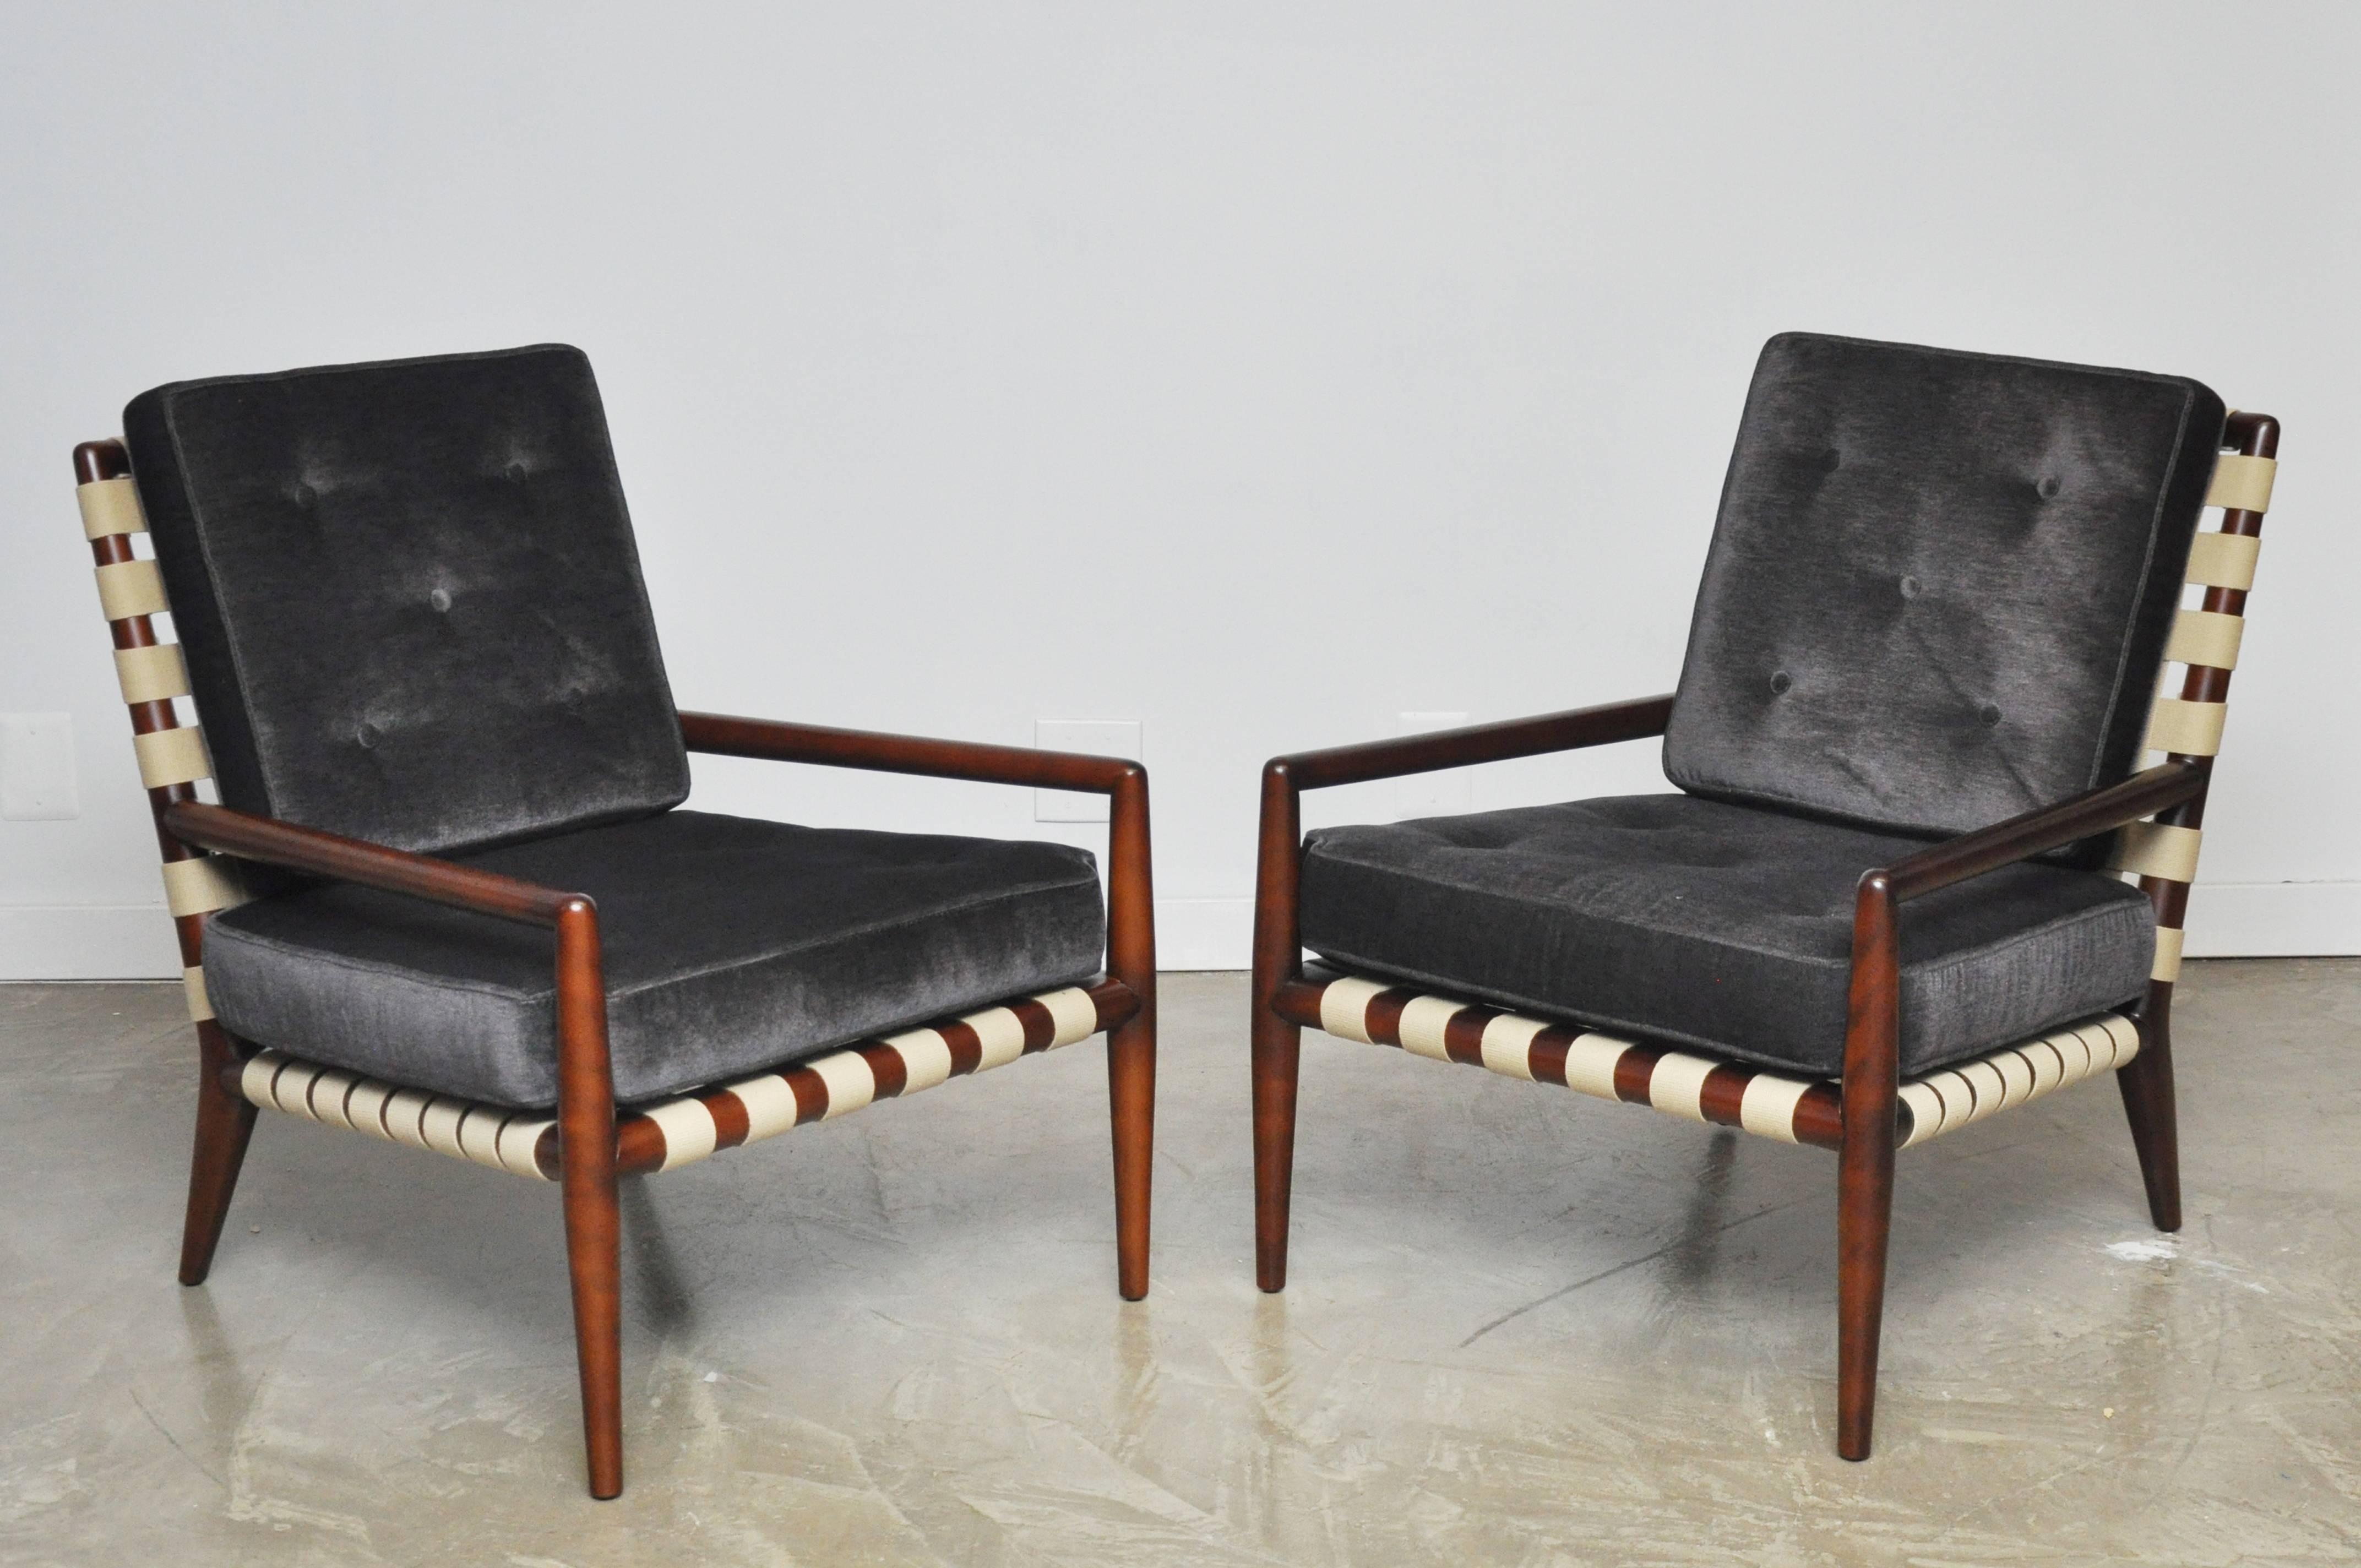 20th Century Pair of Strap Frame Lounge Chairs by T.H. Robsjohn-Gibbings